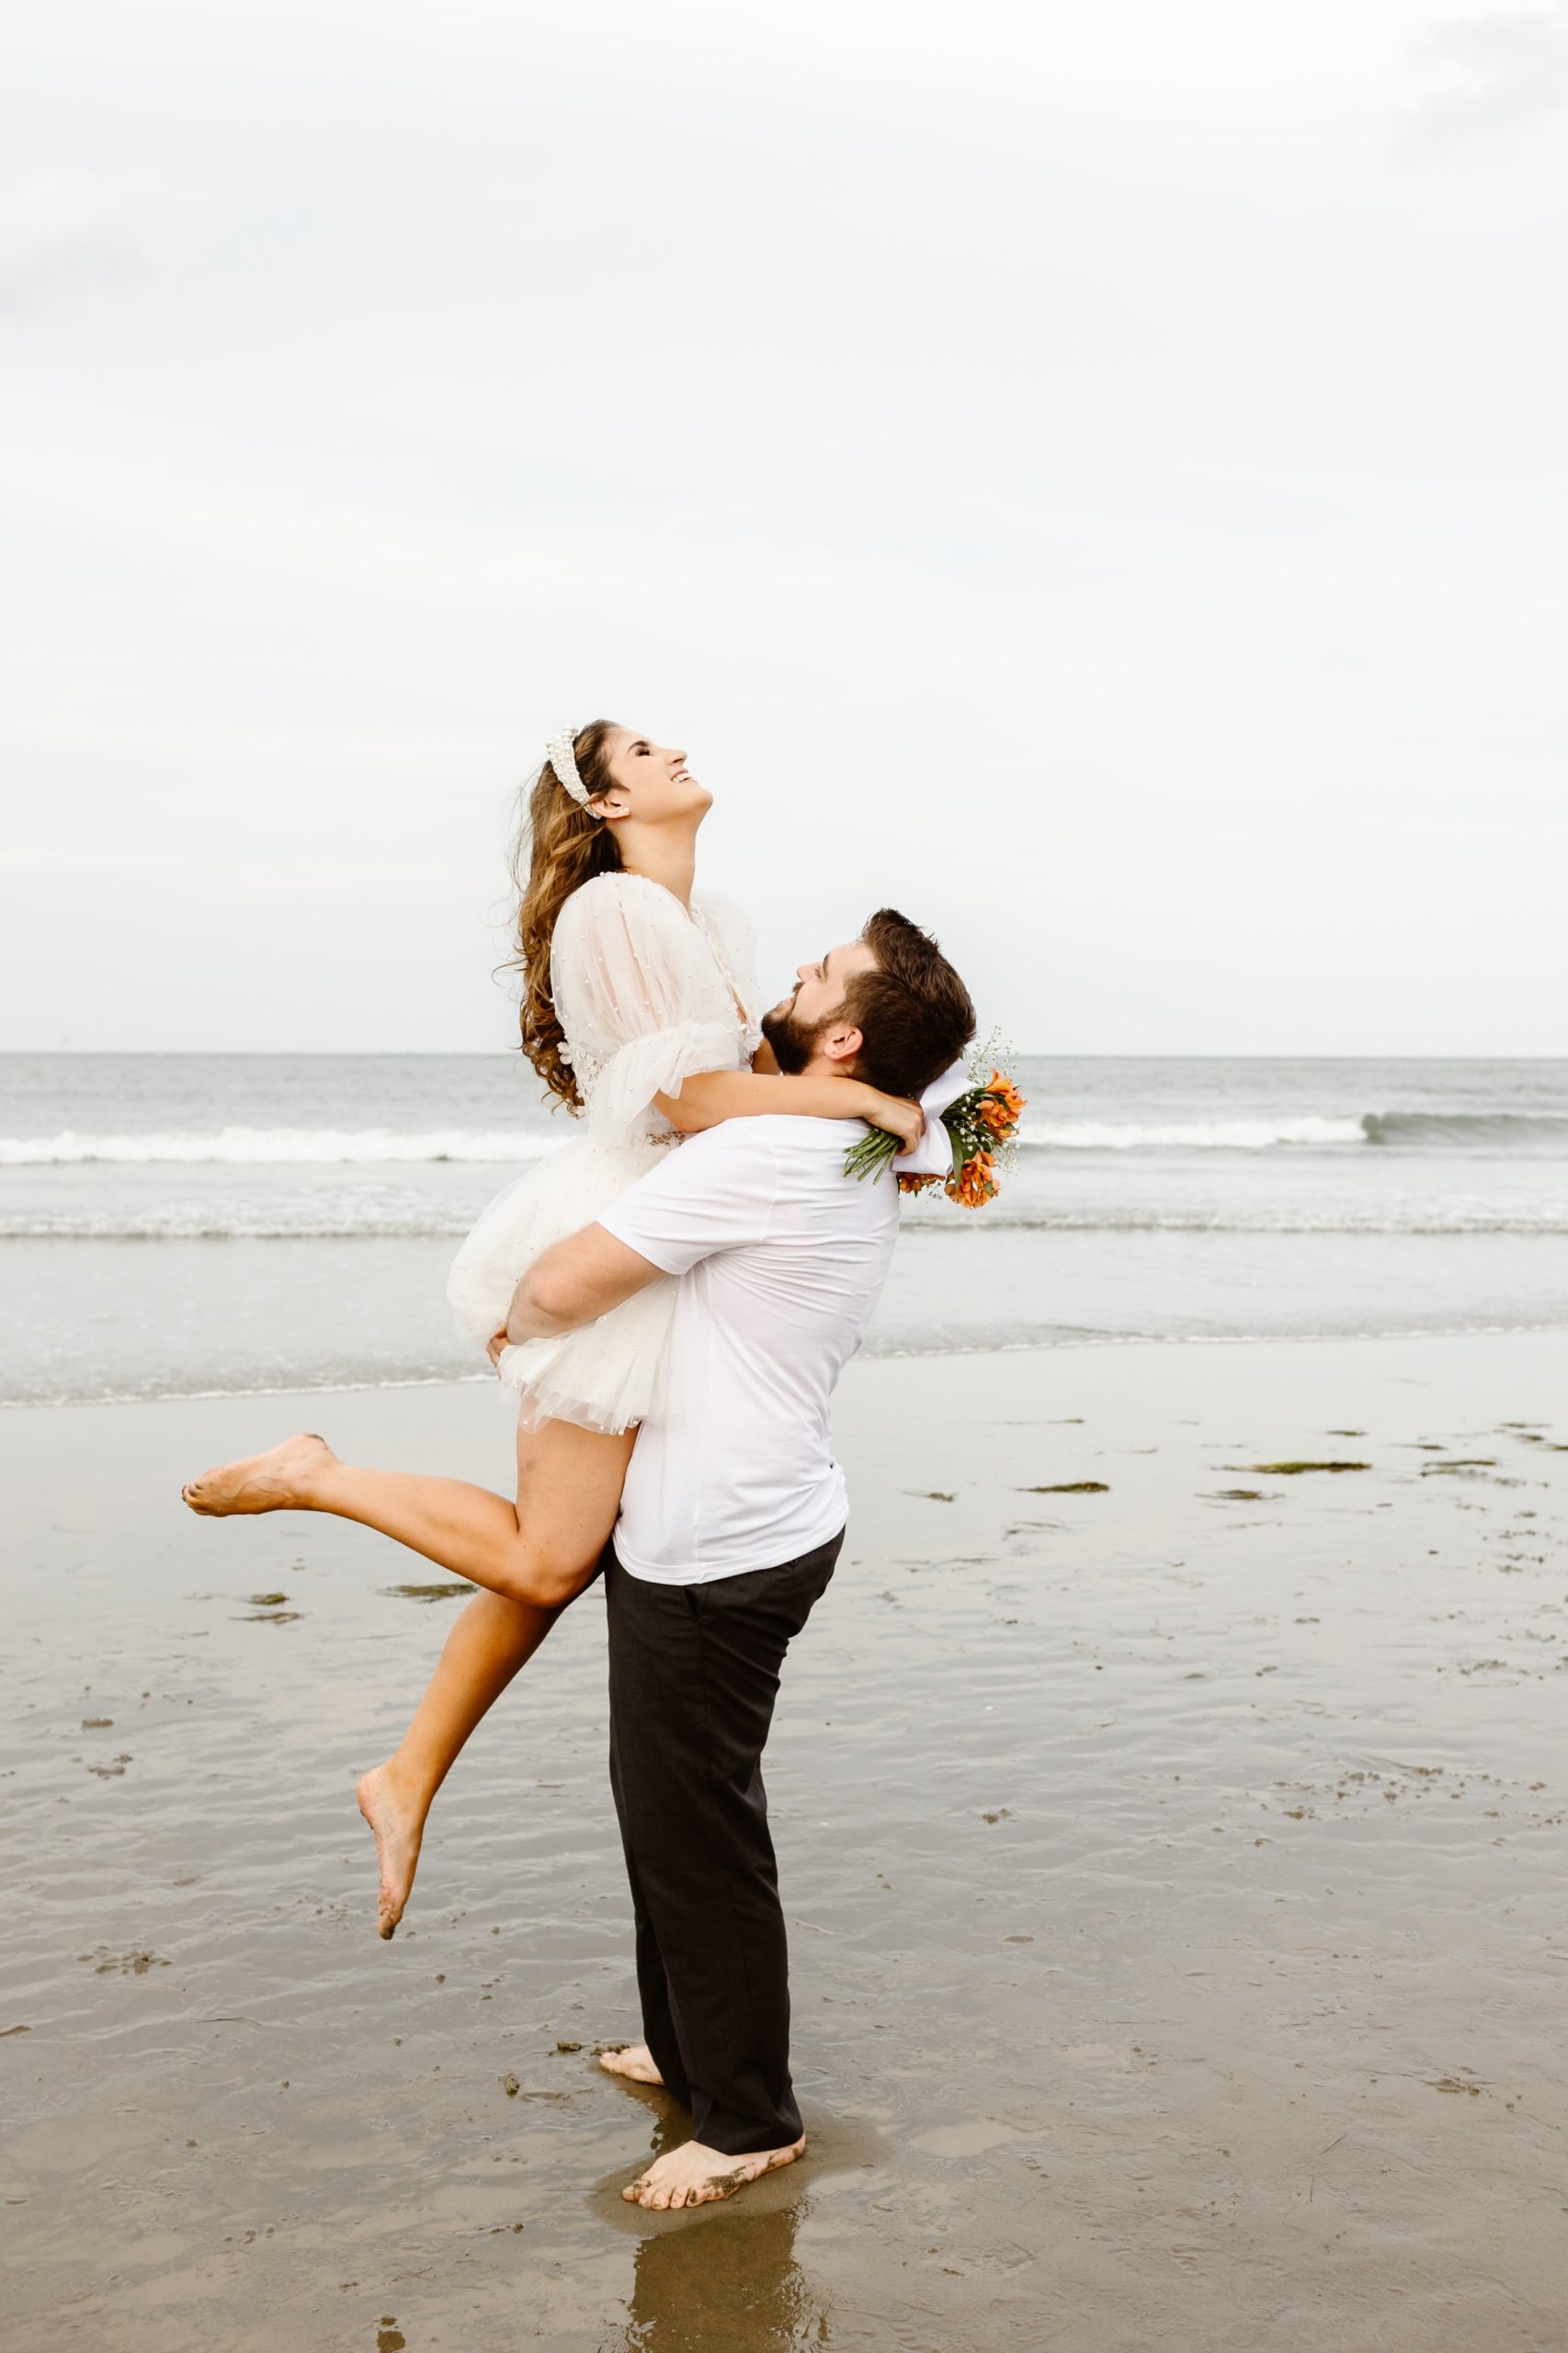 Groom lifting bride in the air as she laughs on the beach in short wedding dress